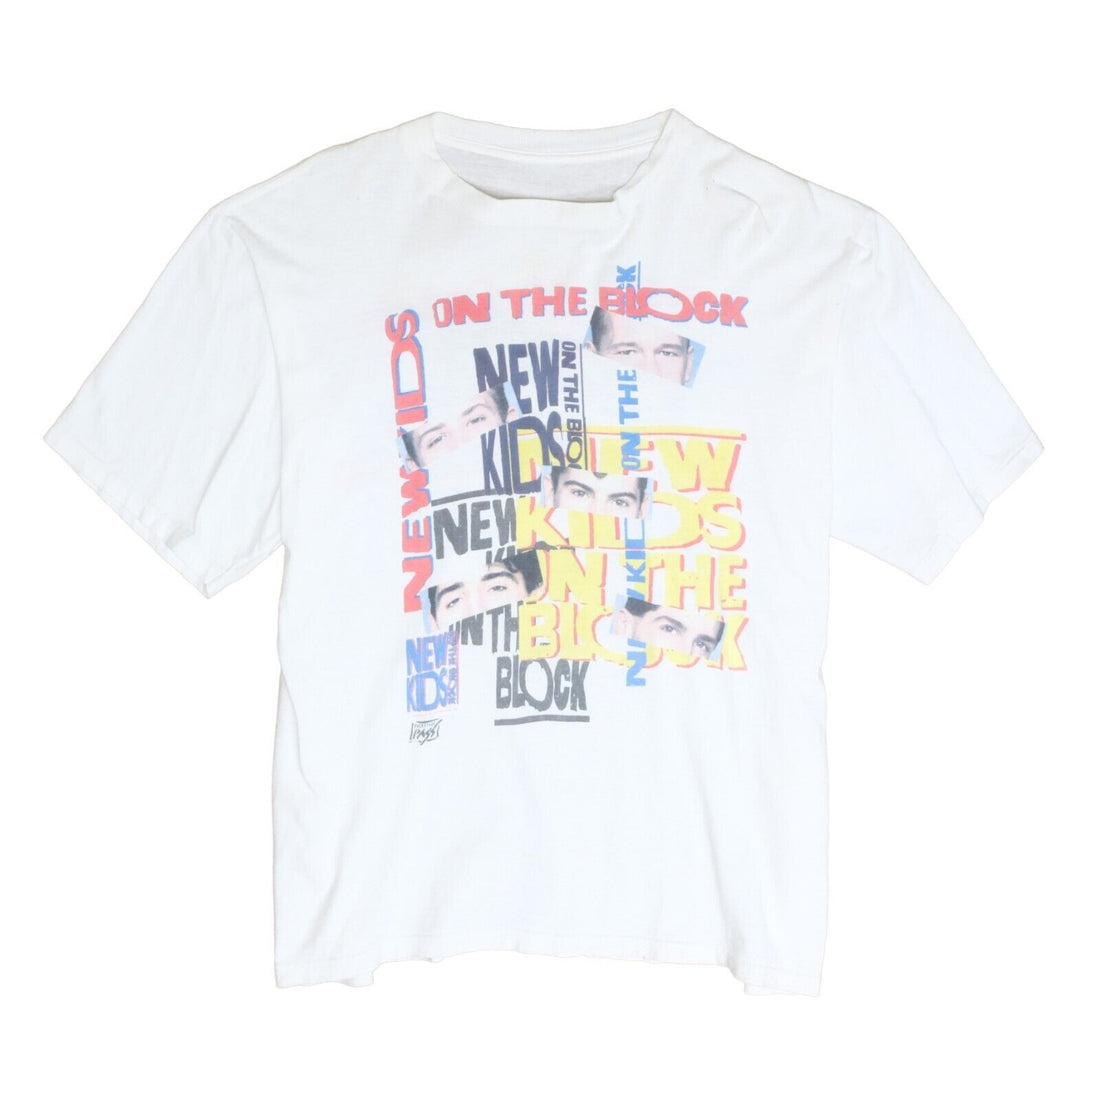 Vintage New Kids On The Block T-Shirt Size XL White Boy Band Tee 1989 80s